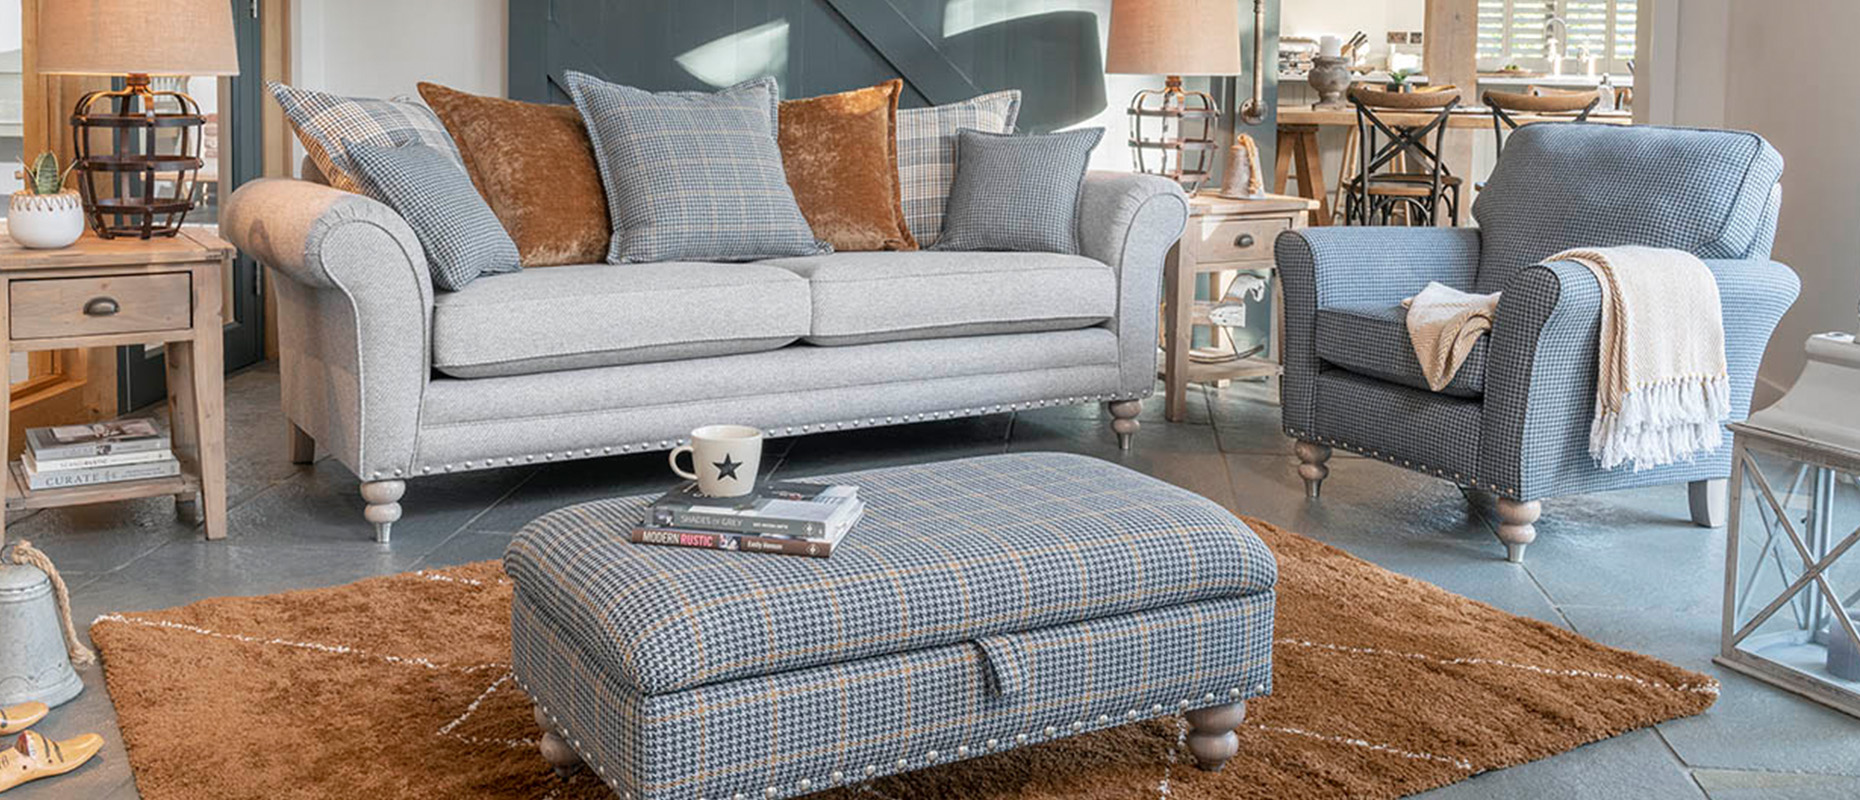 Prescot Fabric collection at Forrest Furnishing